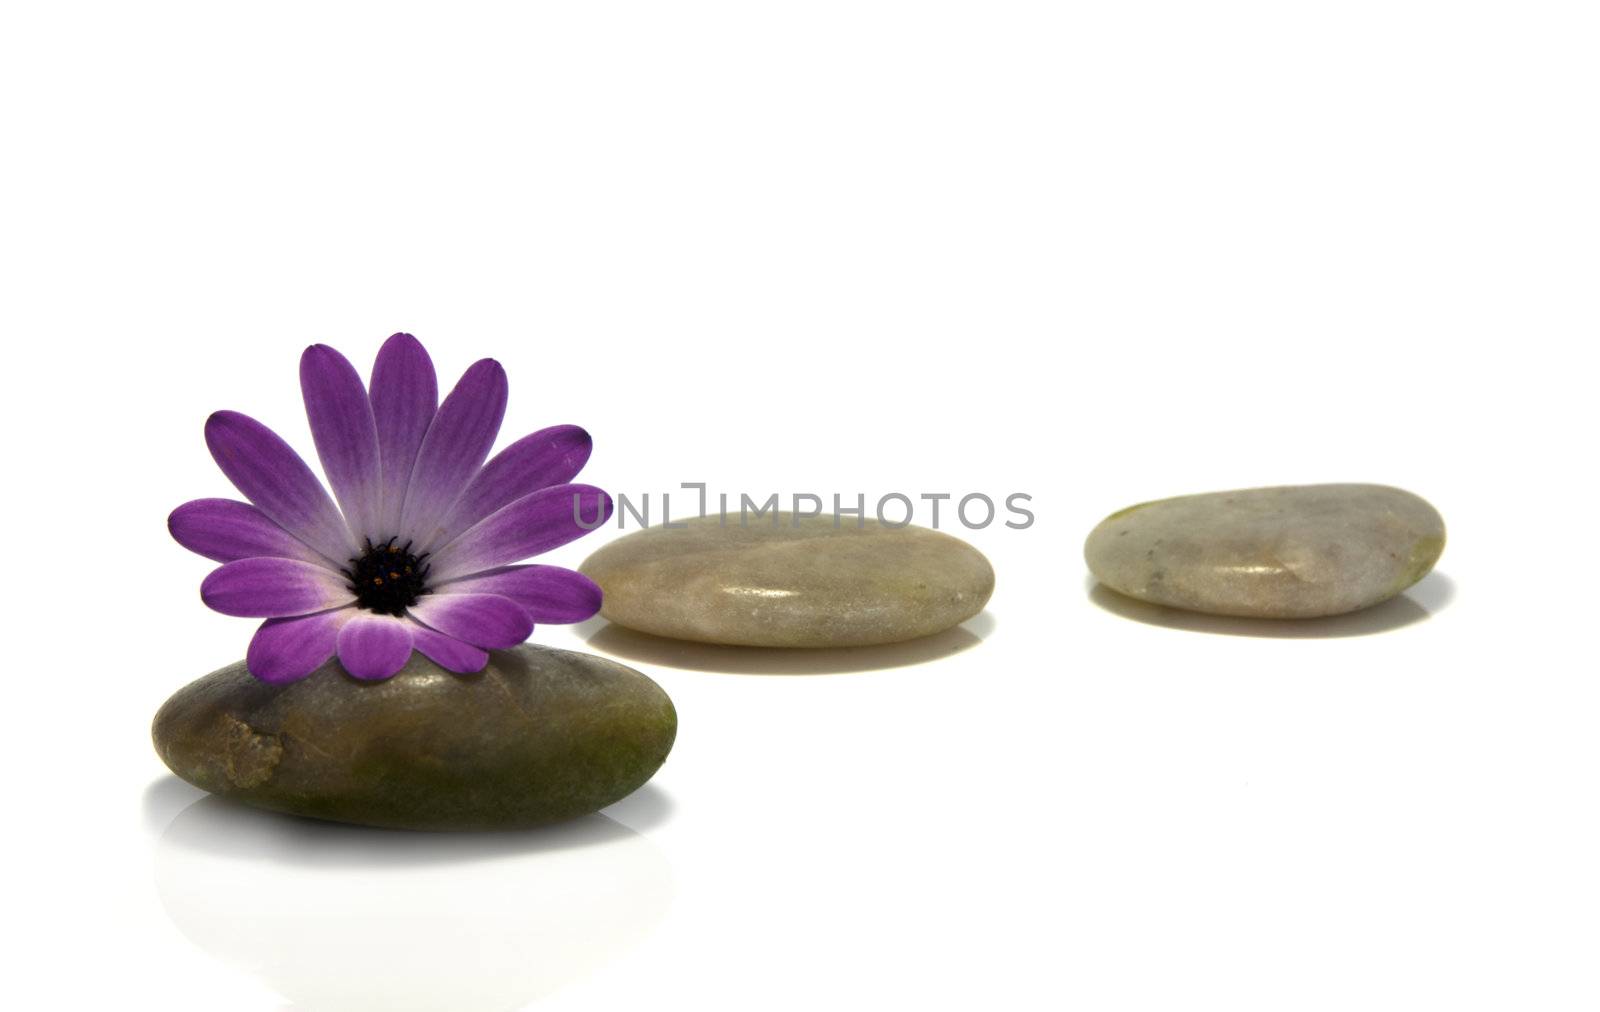 rocks with pink flower by compuinfoto